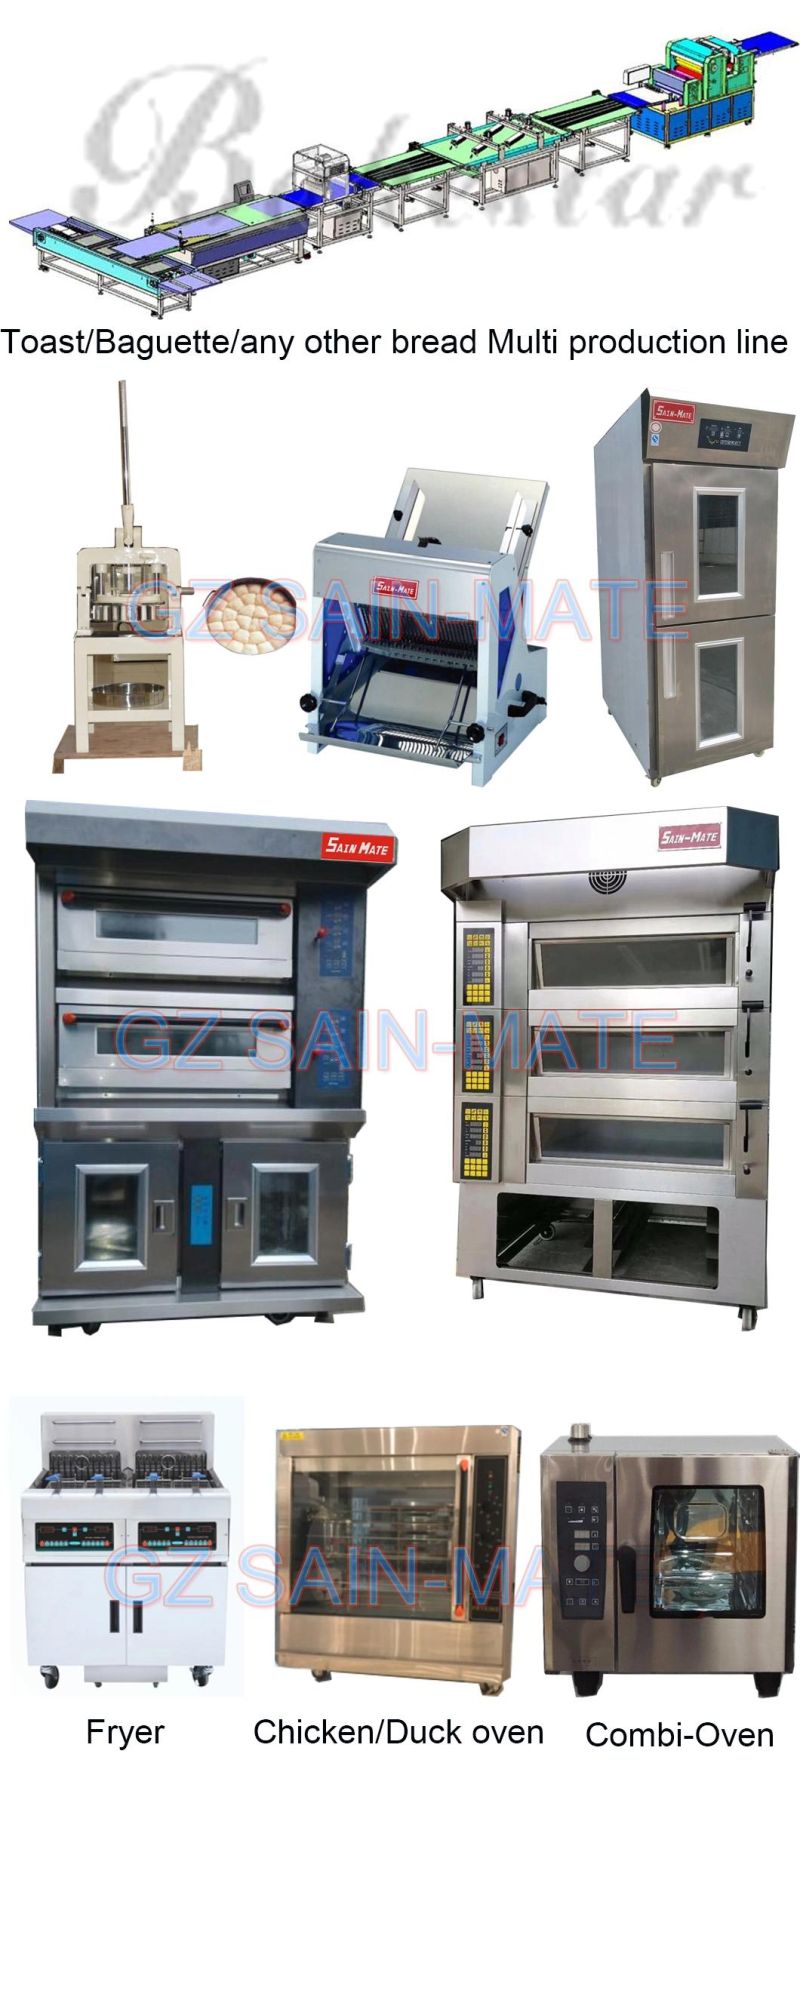 Heavy Duty Rotary Oven Gas Oven, 60 Inch Rotary Table Pita Bread Oven